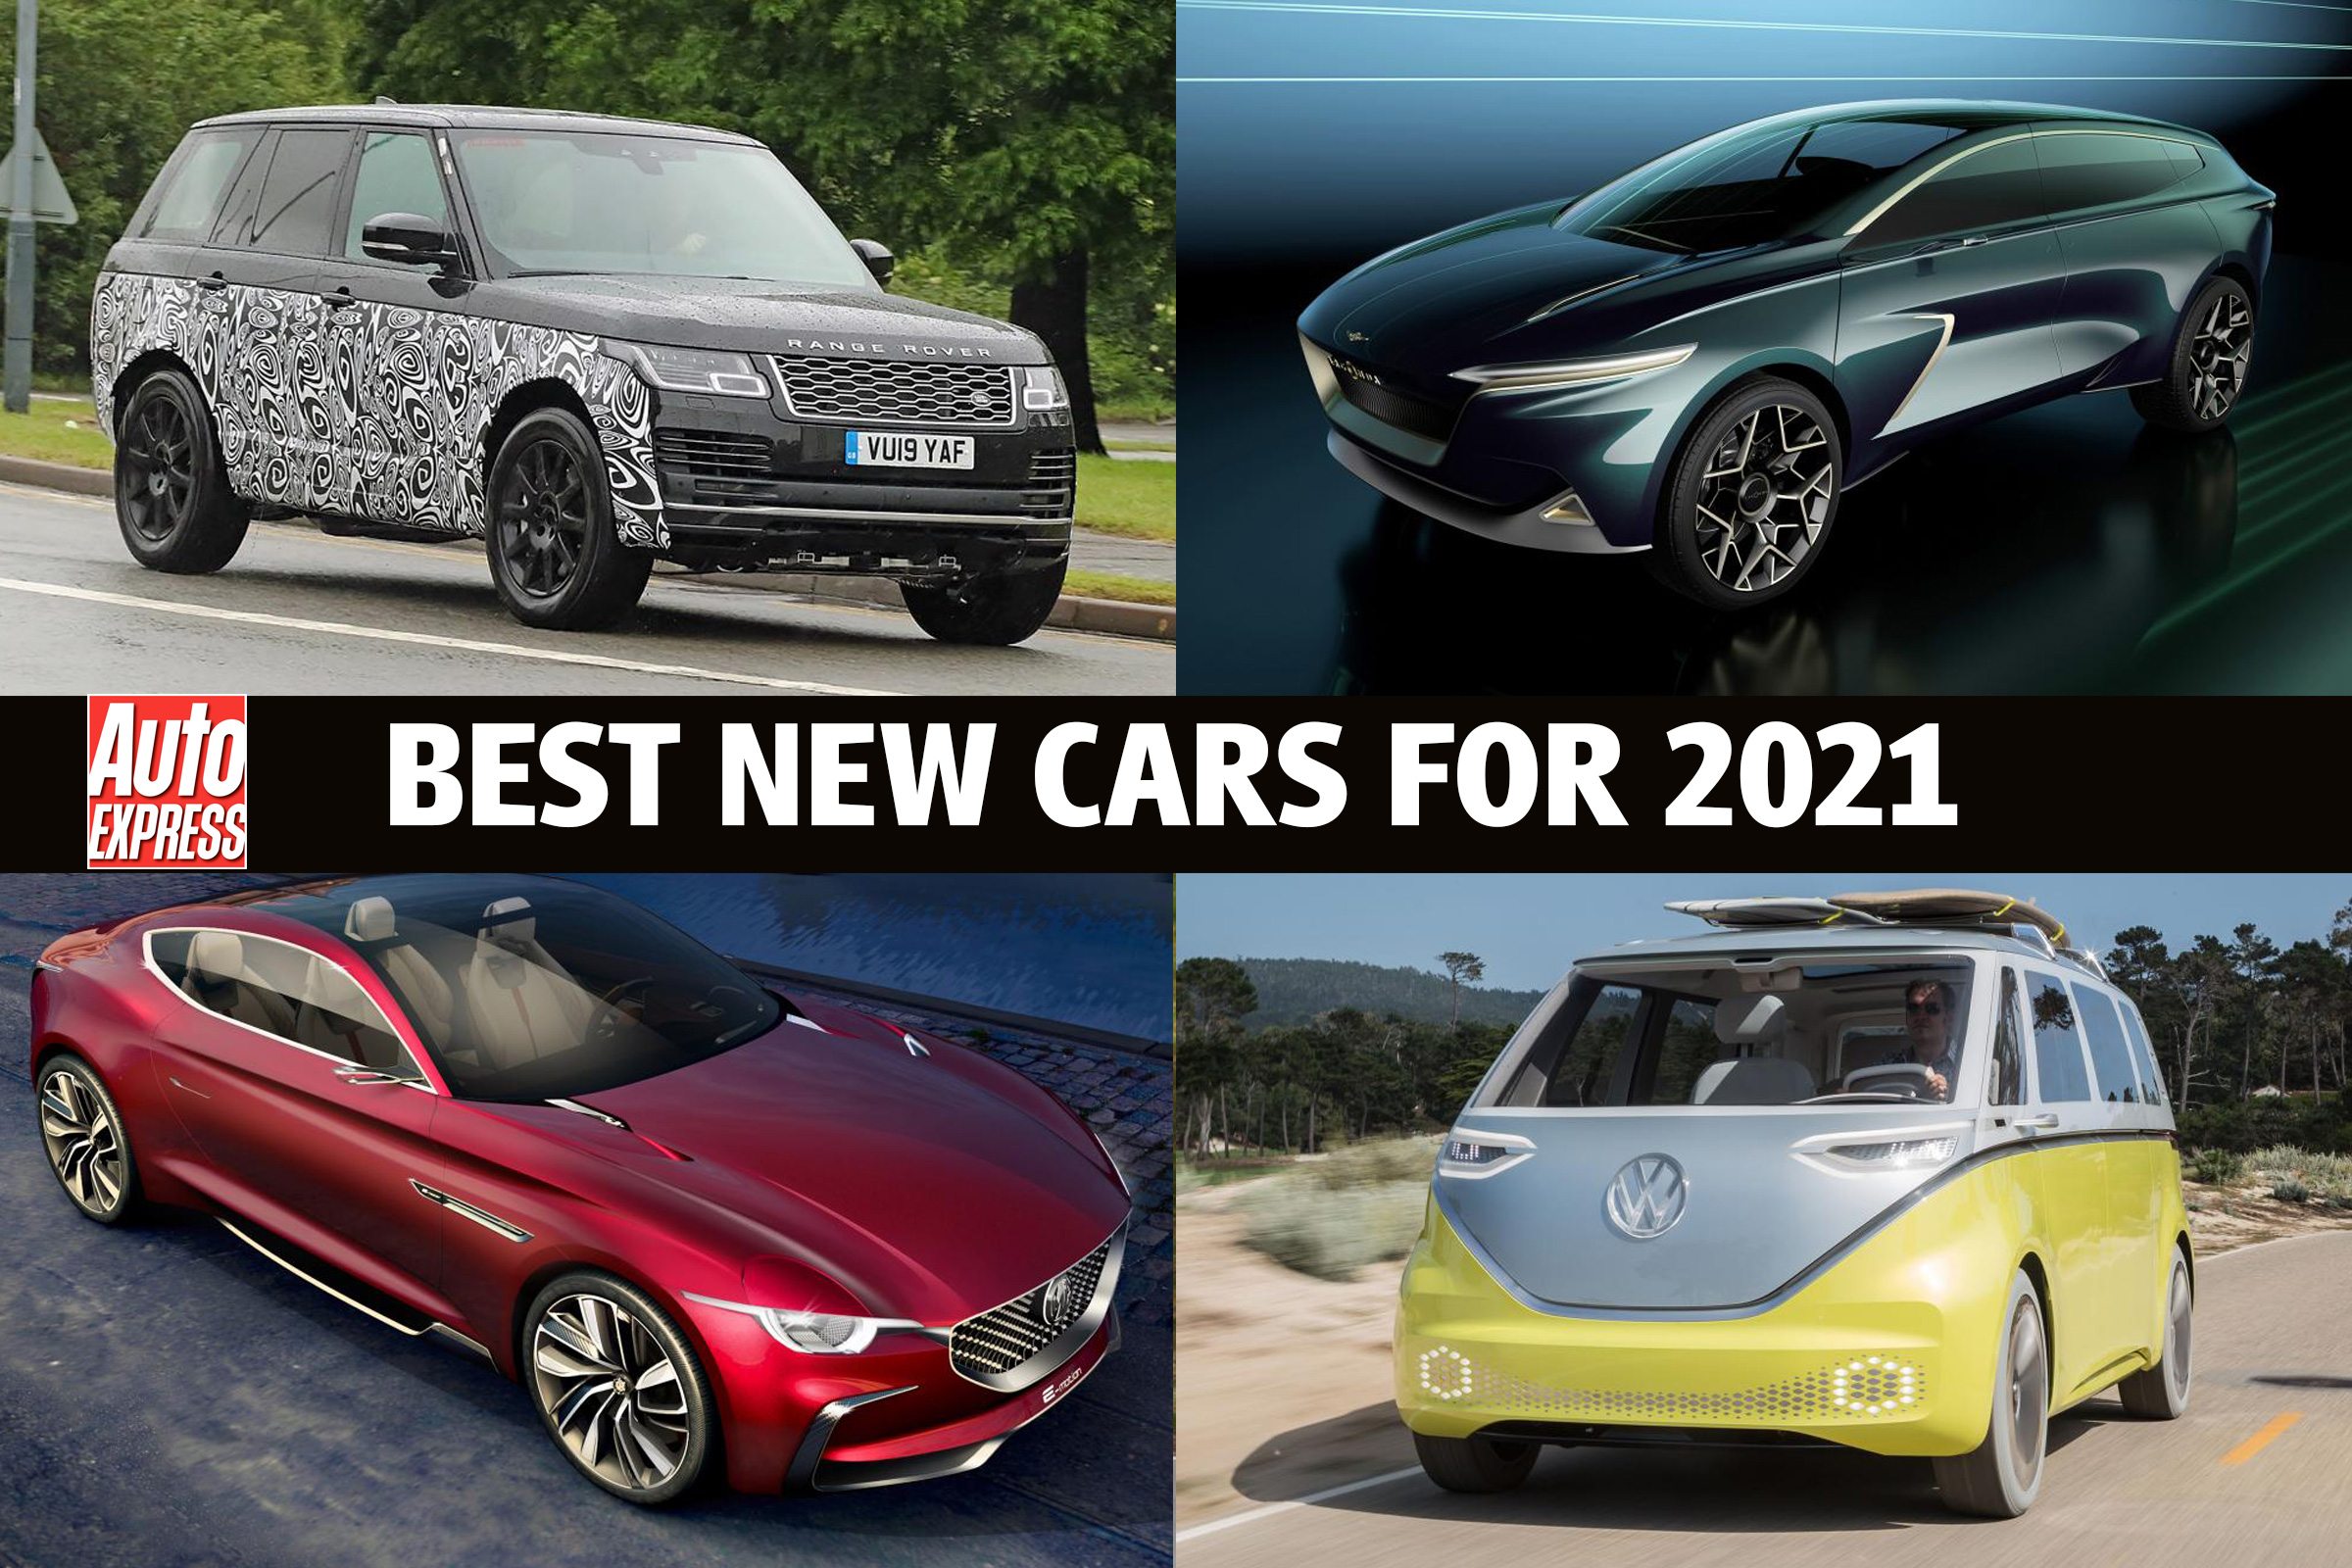  Best  new  cars  coming in 2022  and beyond J Z Auto Express